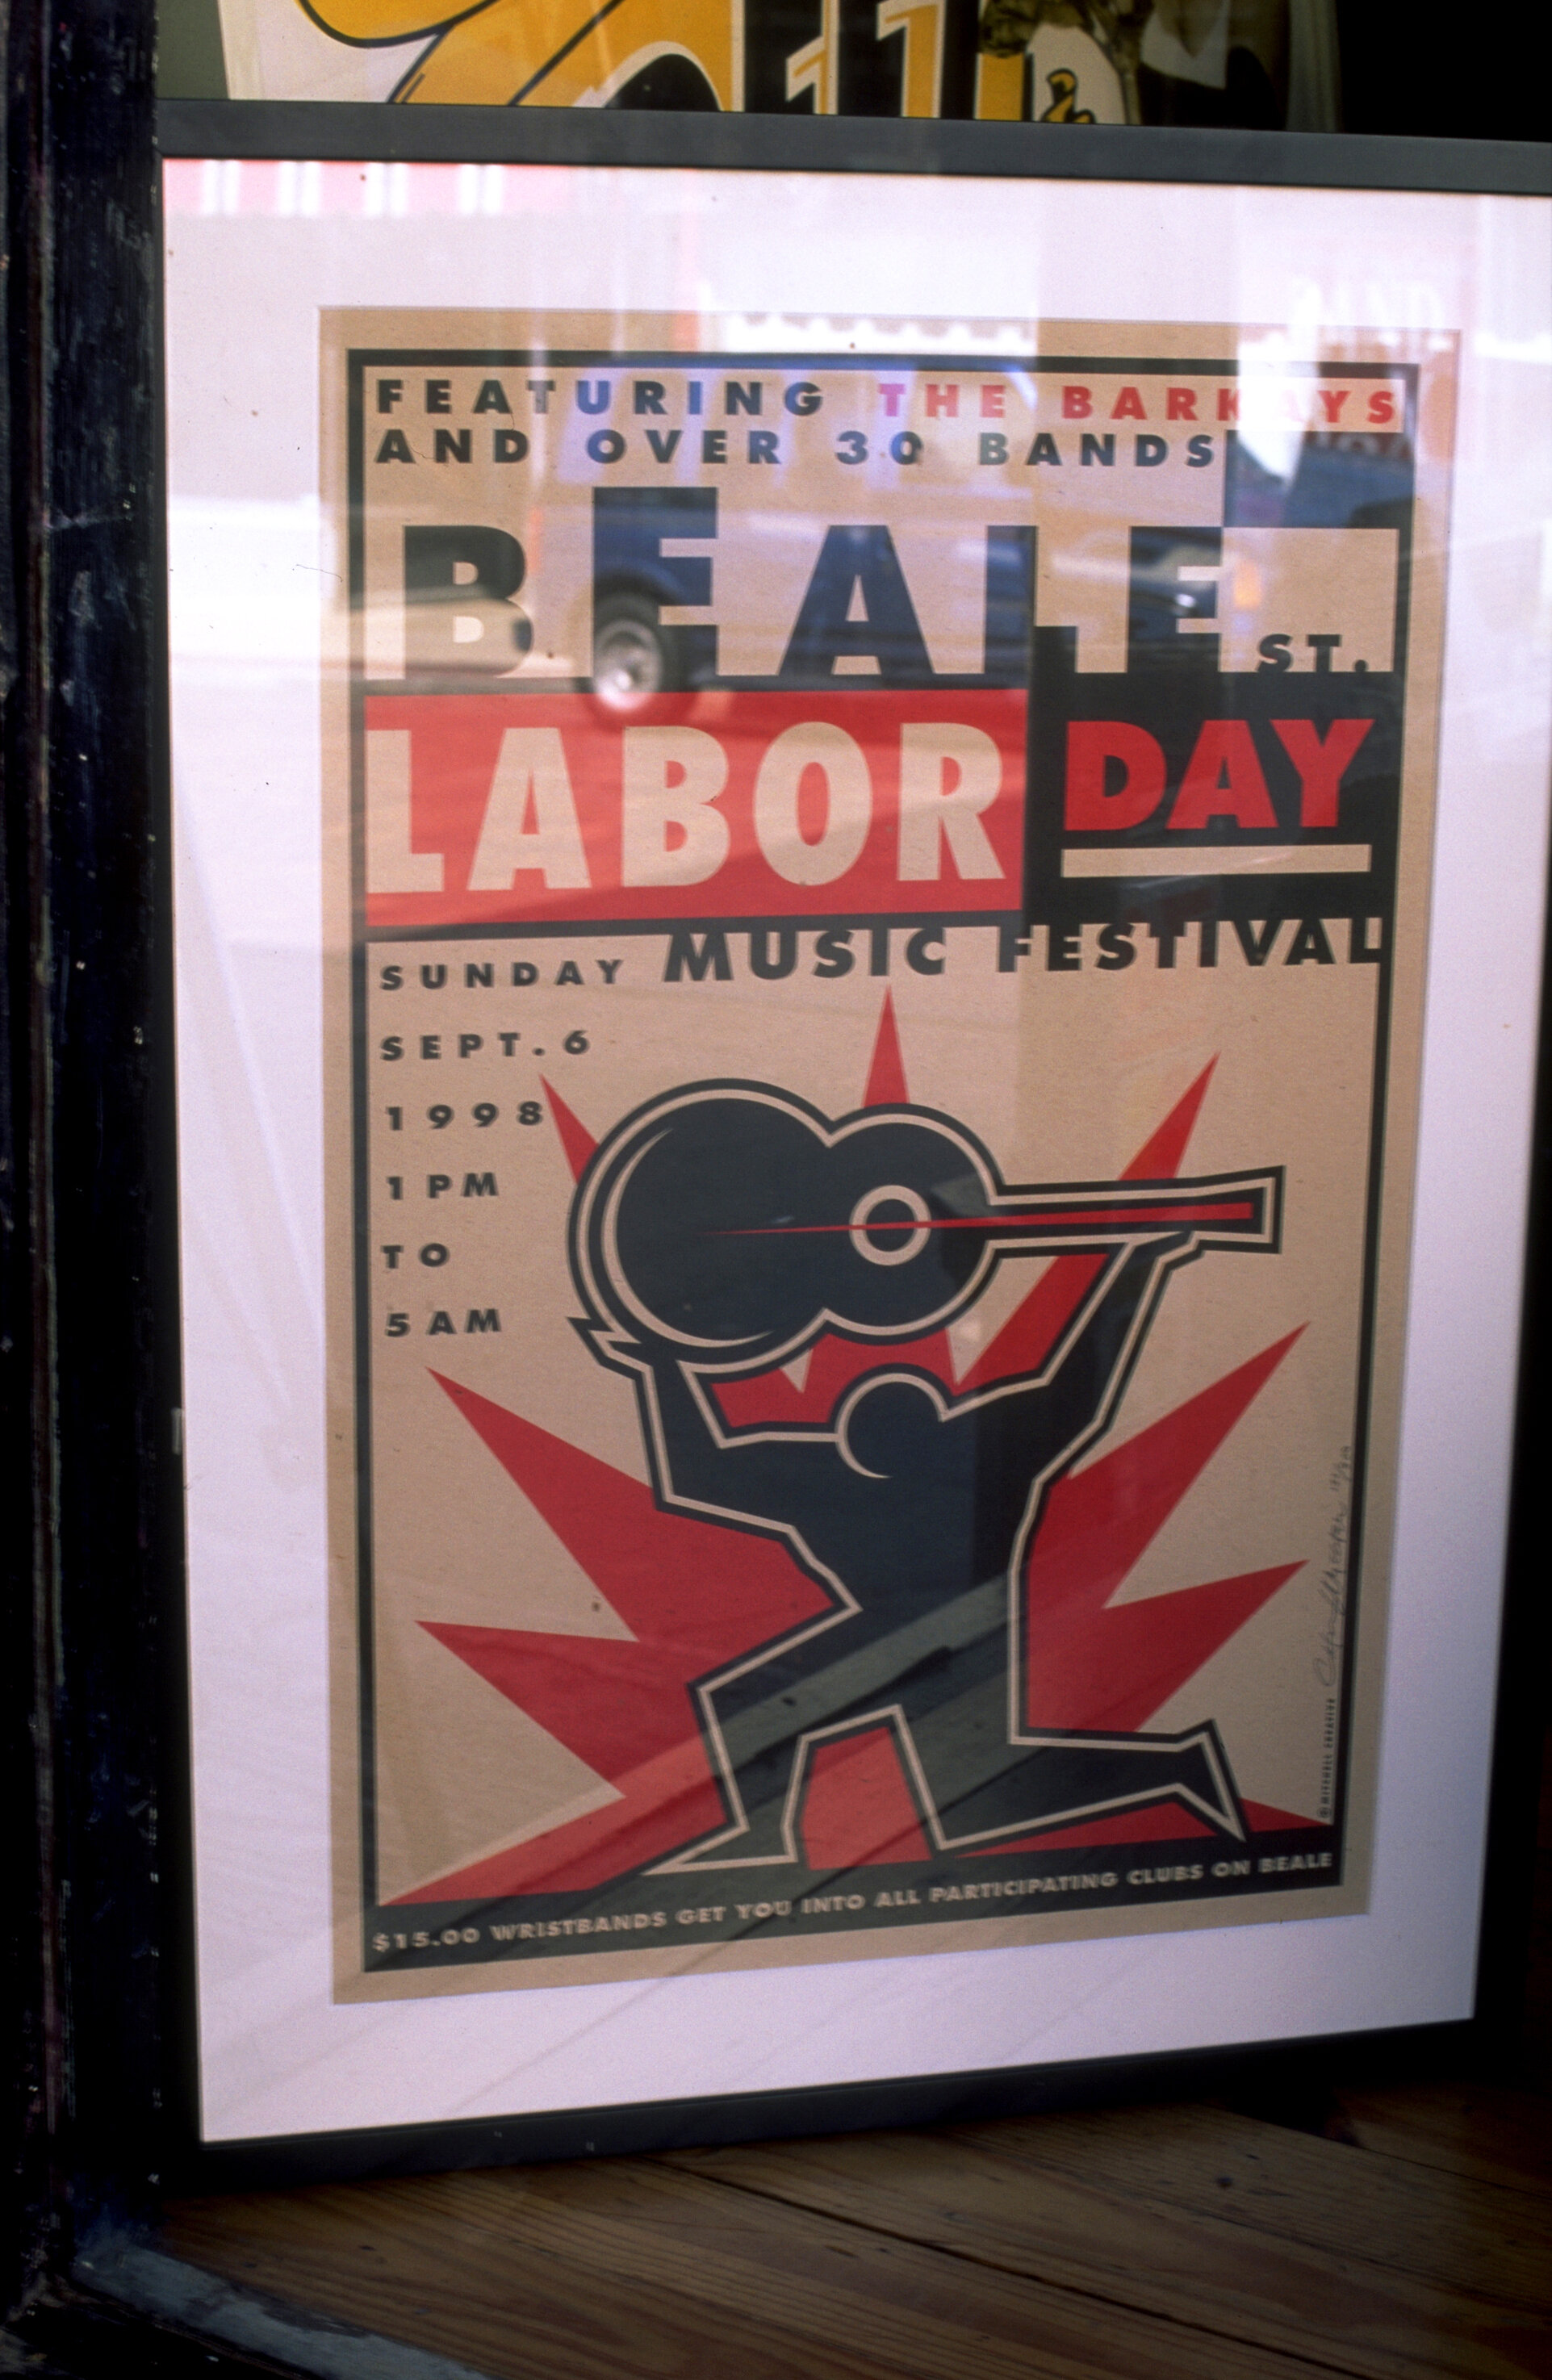  Beale Street Labor Day Music Festival poster design  © Chuck Mitchell. All rights reserved. 